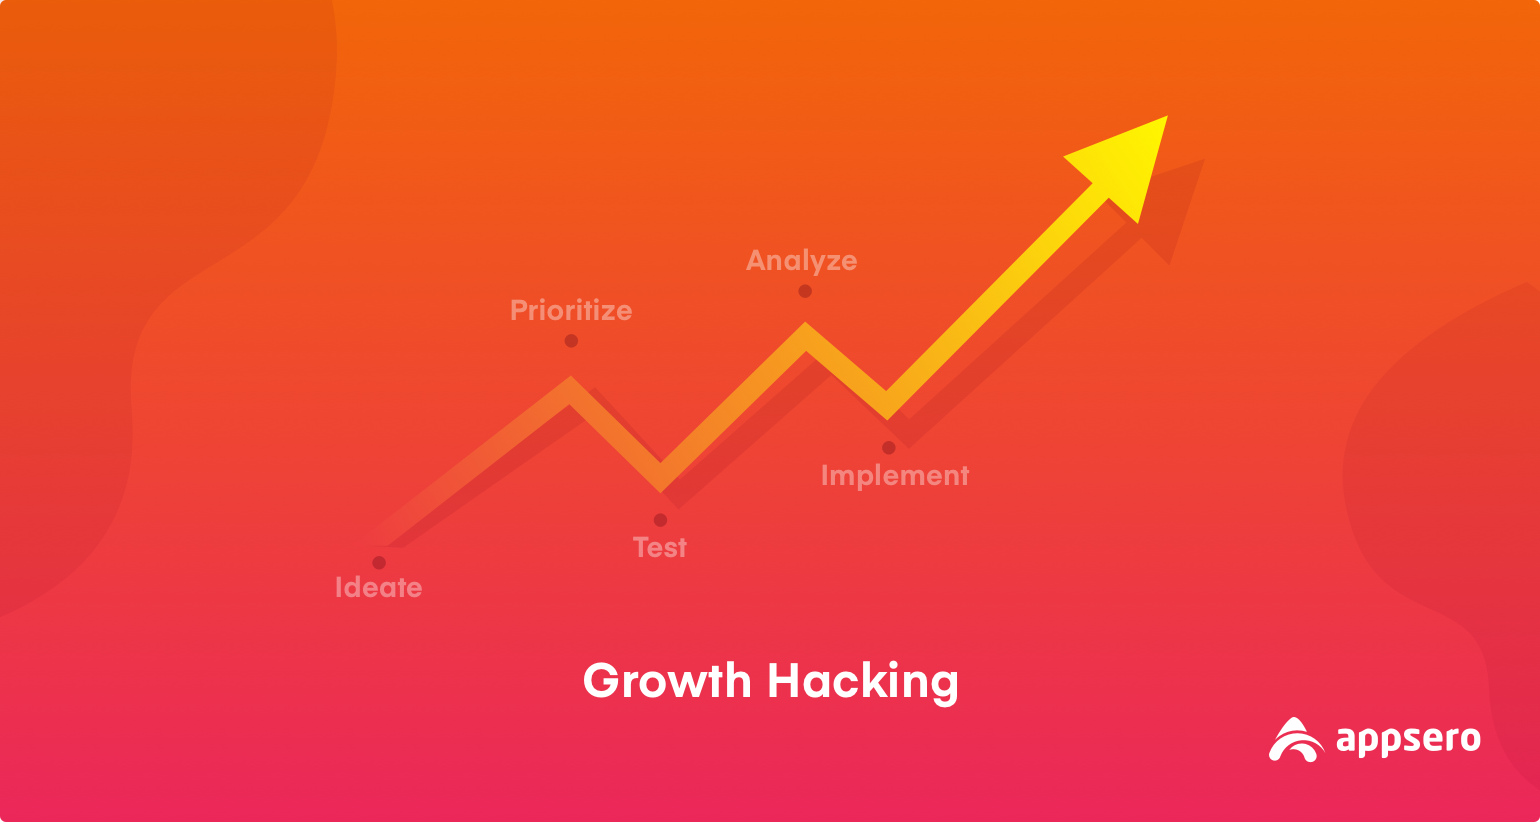 Growth Hacking: Whether To Use It Or Not?